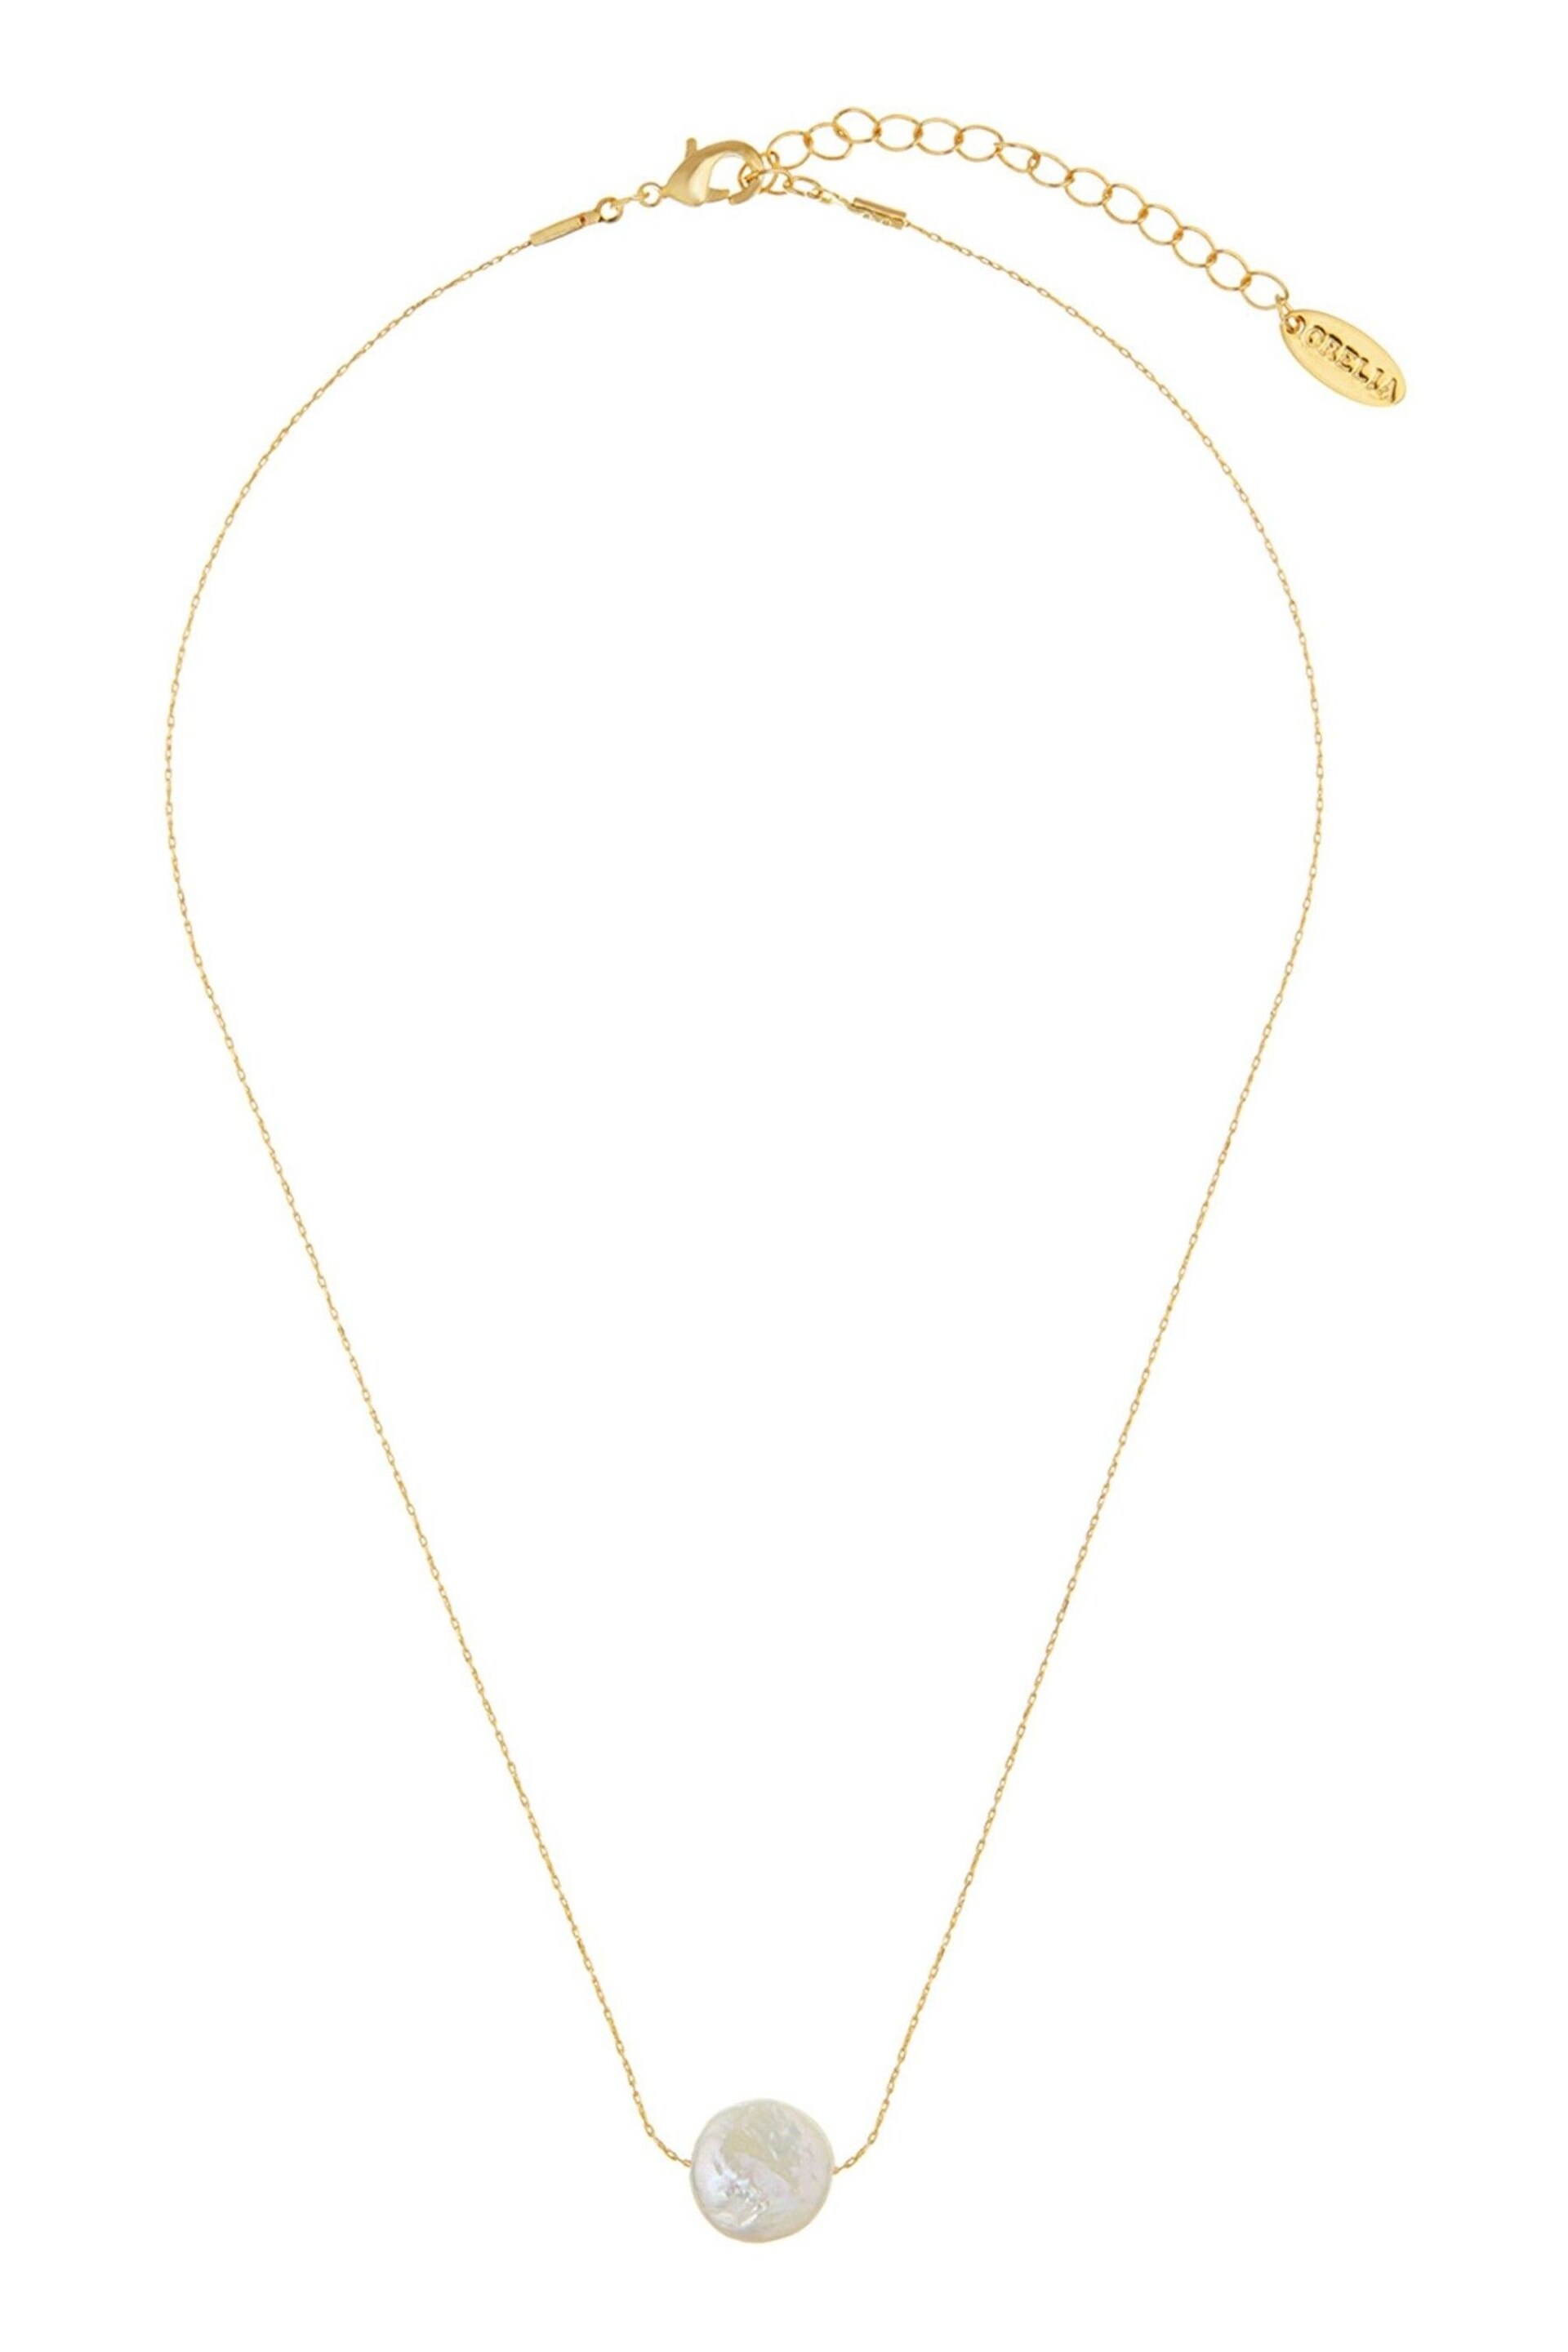 Orelia London Gold Plated Stationed Flat Pearl Collar Necklace - Image 1 of 4